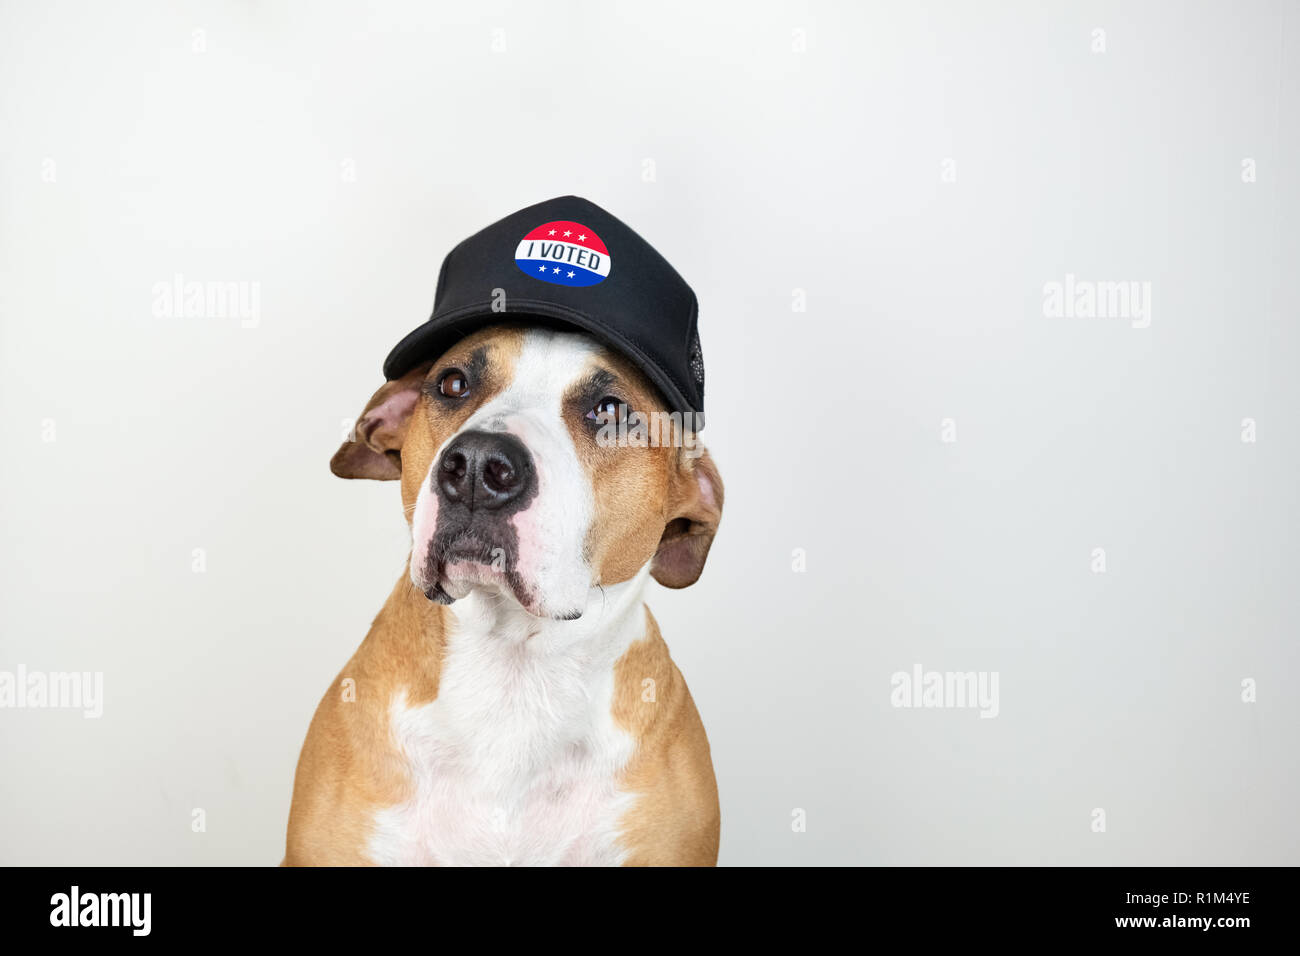 American election activism concept: staffordshire terrier dog in patriotic baseball hat.  Pitbull terrier in trucker hat with 'i voted' sign in studio Stock Photo